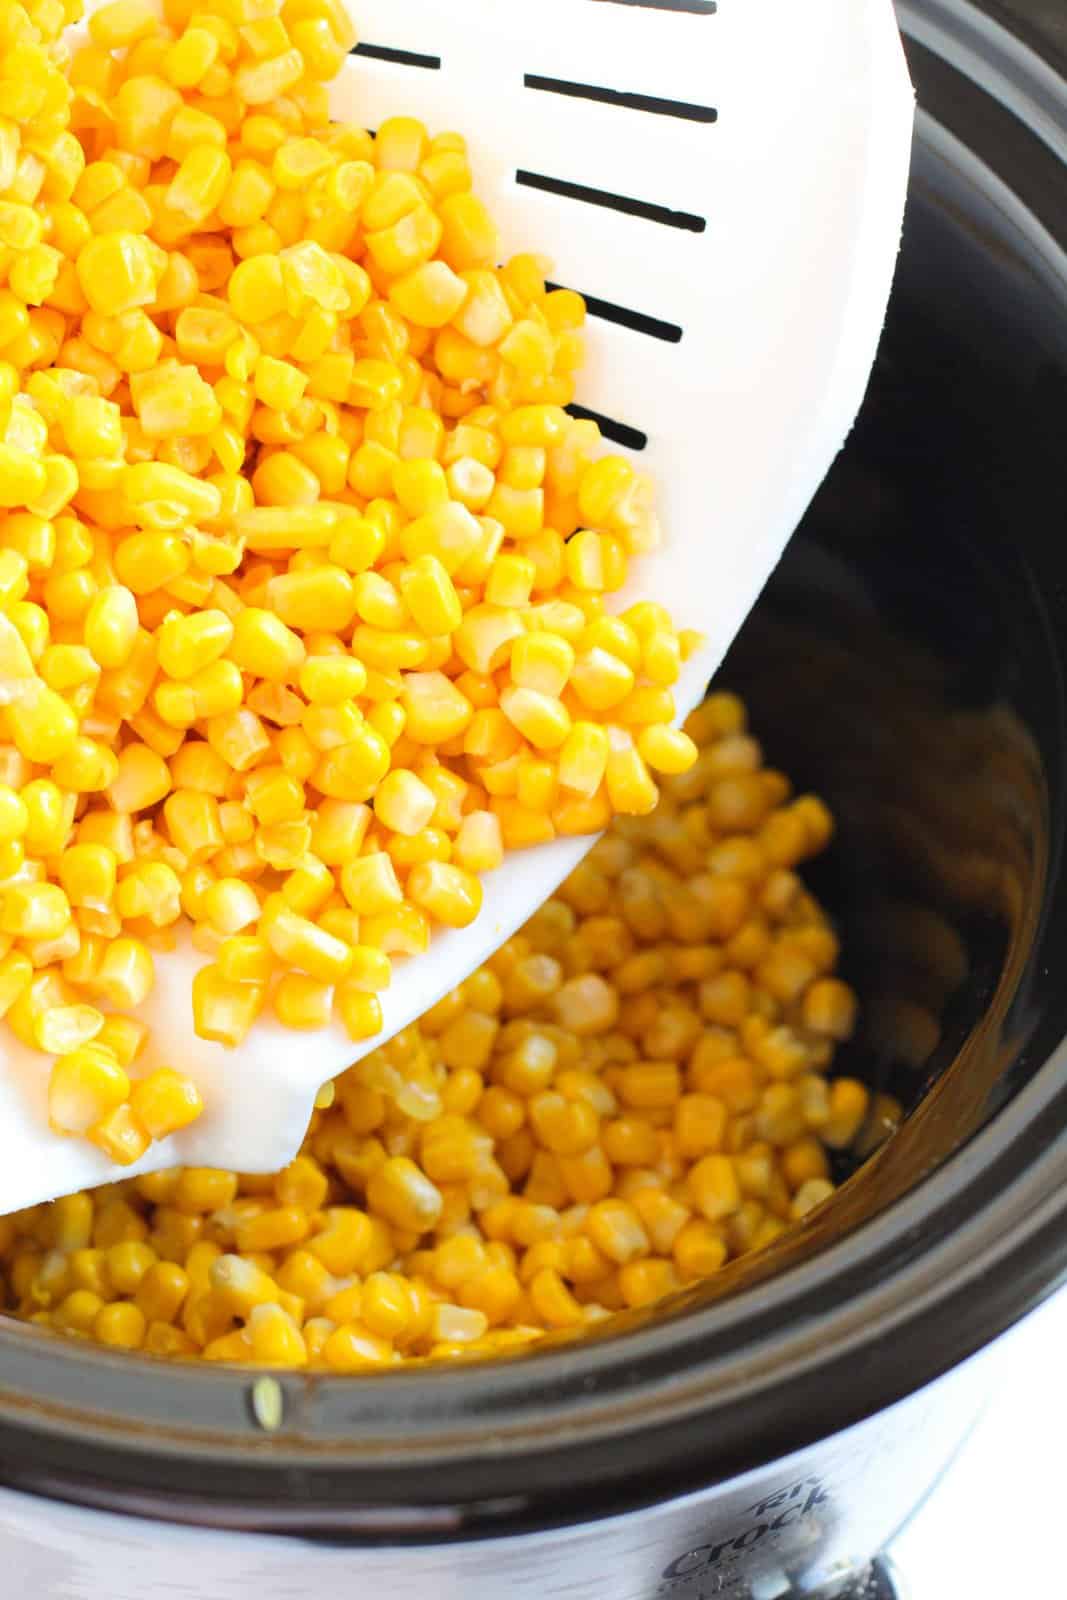 Corn being poured into crock pot.